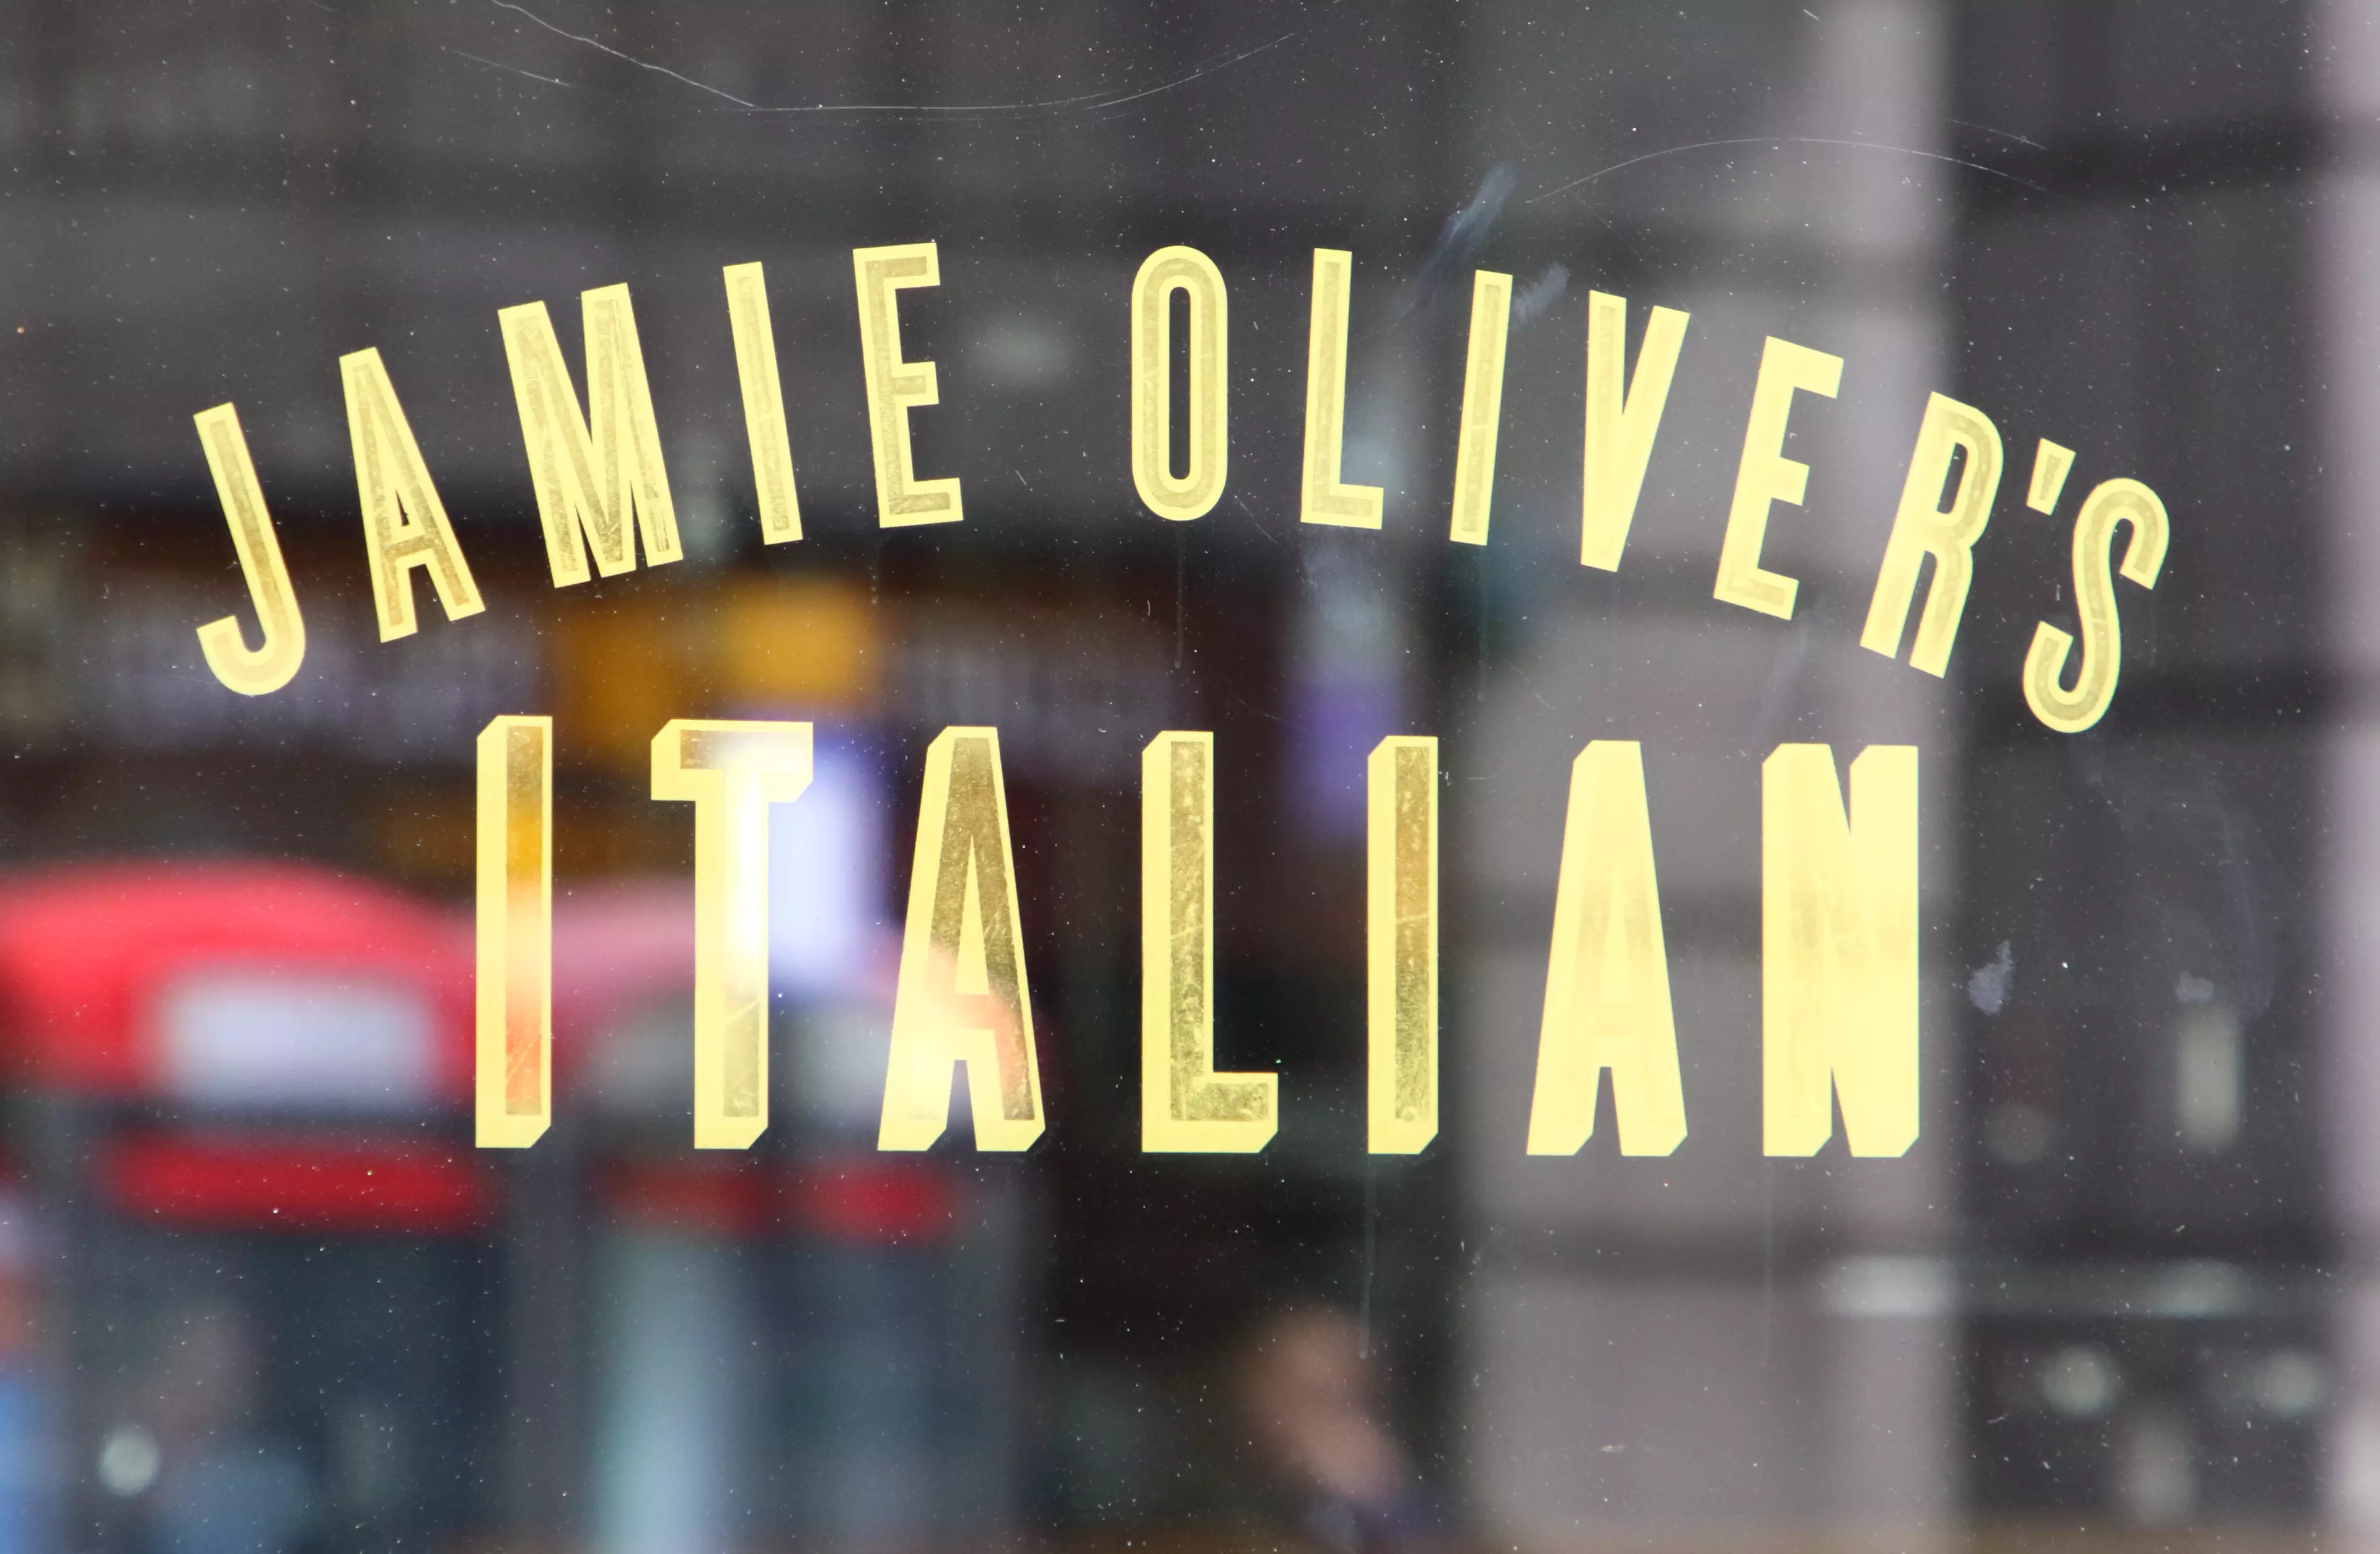 Jamie Oliver recently revealed that his restaurant empire had collapsed.